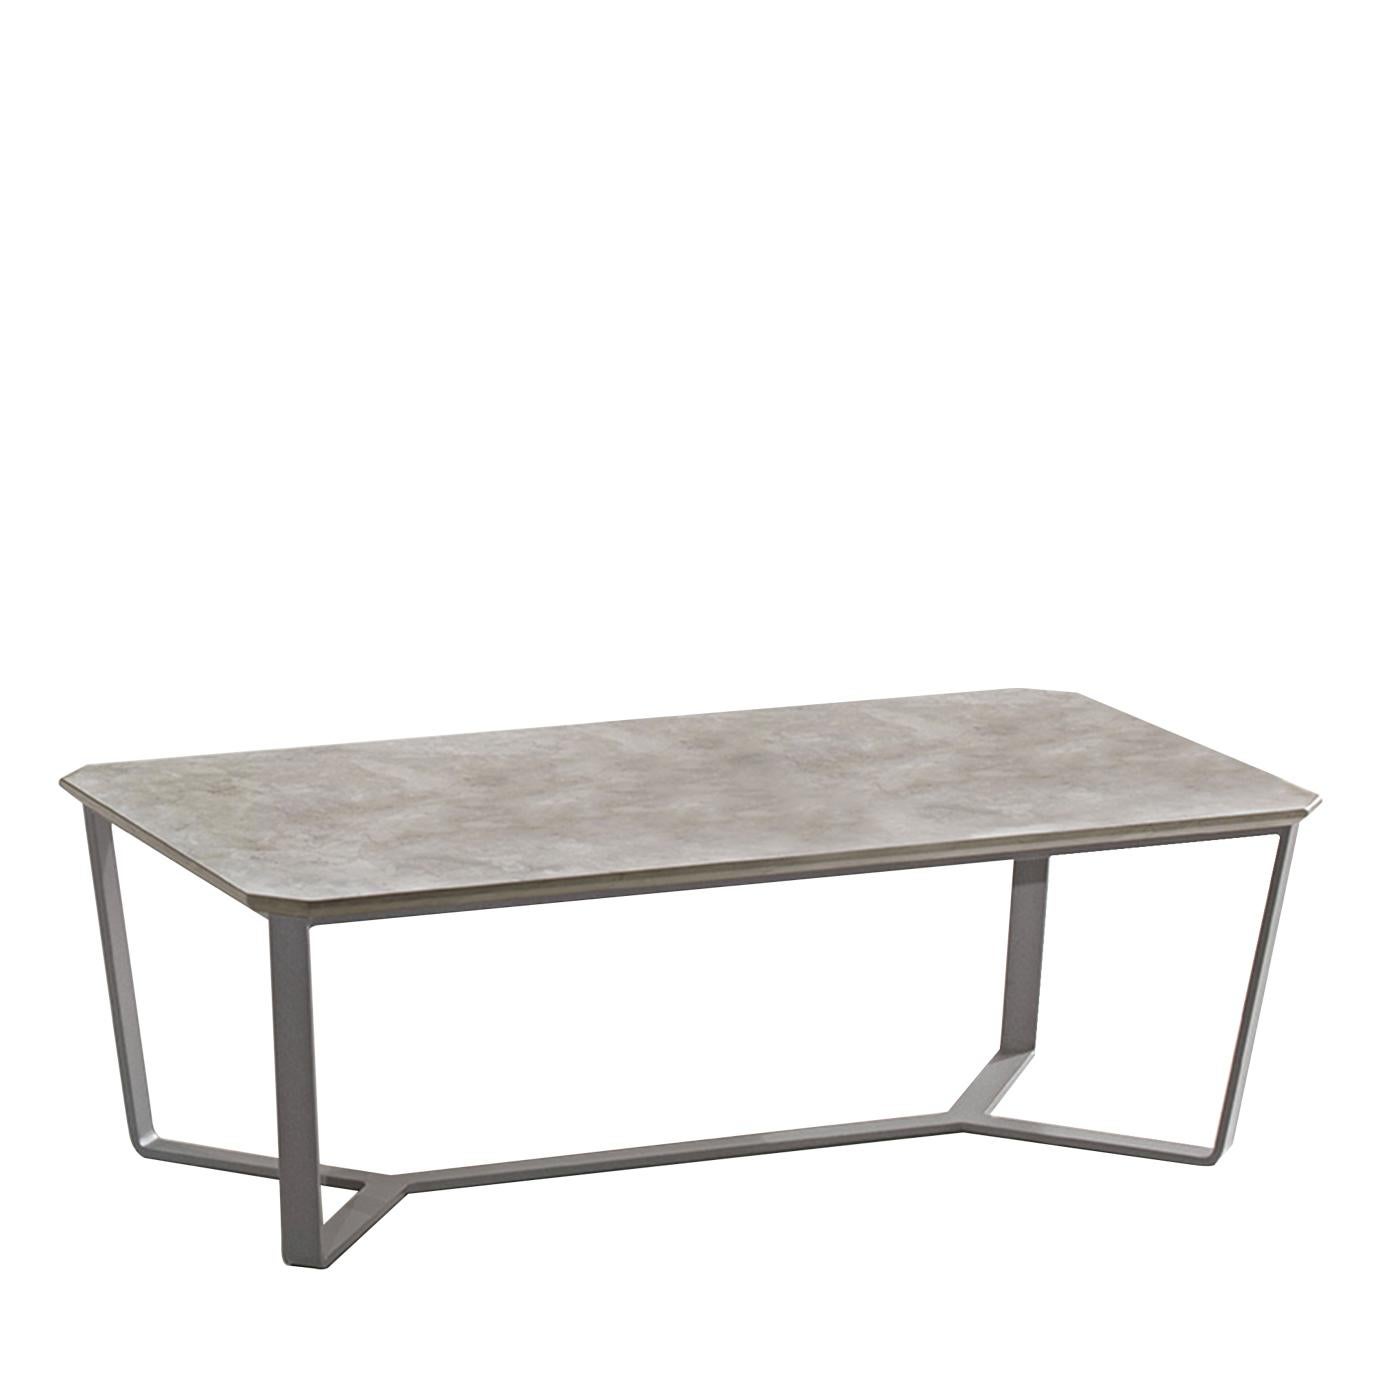 An interplay of matching hues and contrasting materials, this coffee table is a superb object of functional decor whose timeless allure will fit both Classic and modern homes. The metal base in gray-finished metal provides a light and airy support